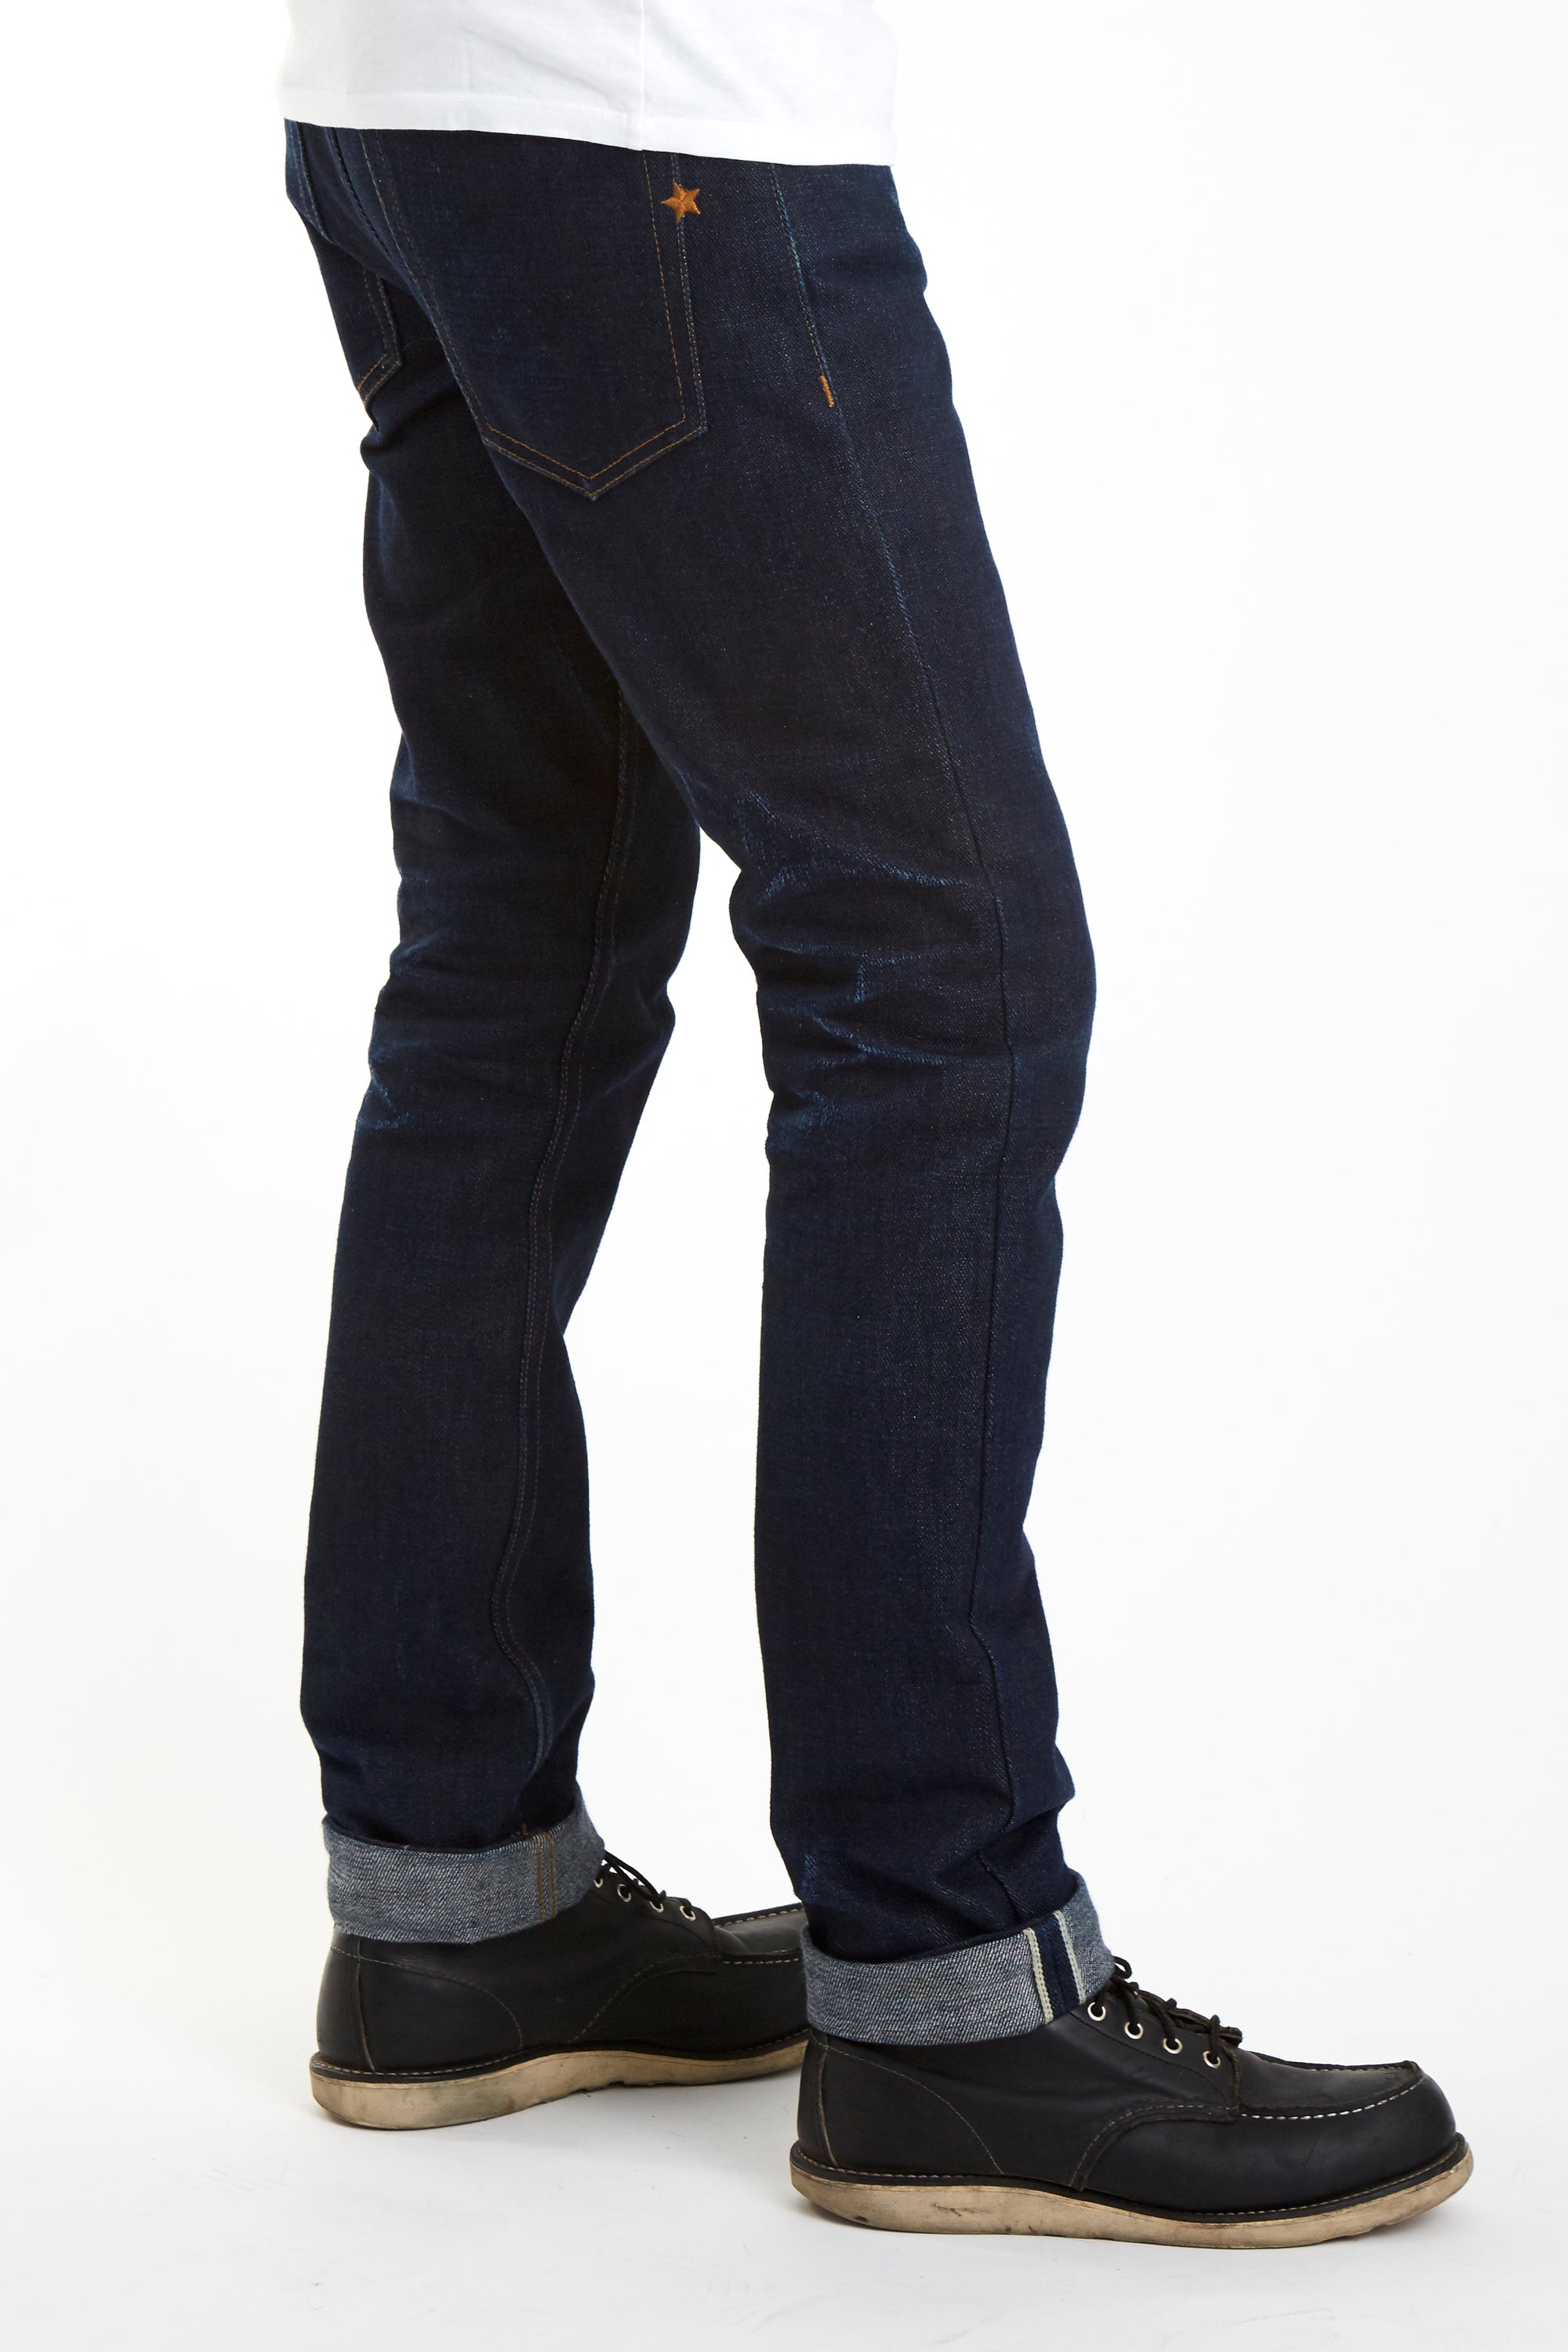 $48 Cone Mills Selvage - Brave Star Selvage